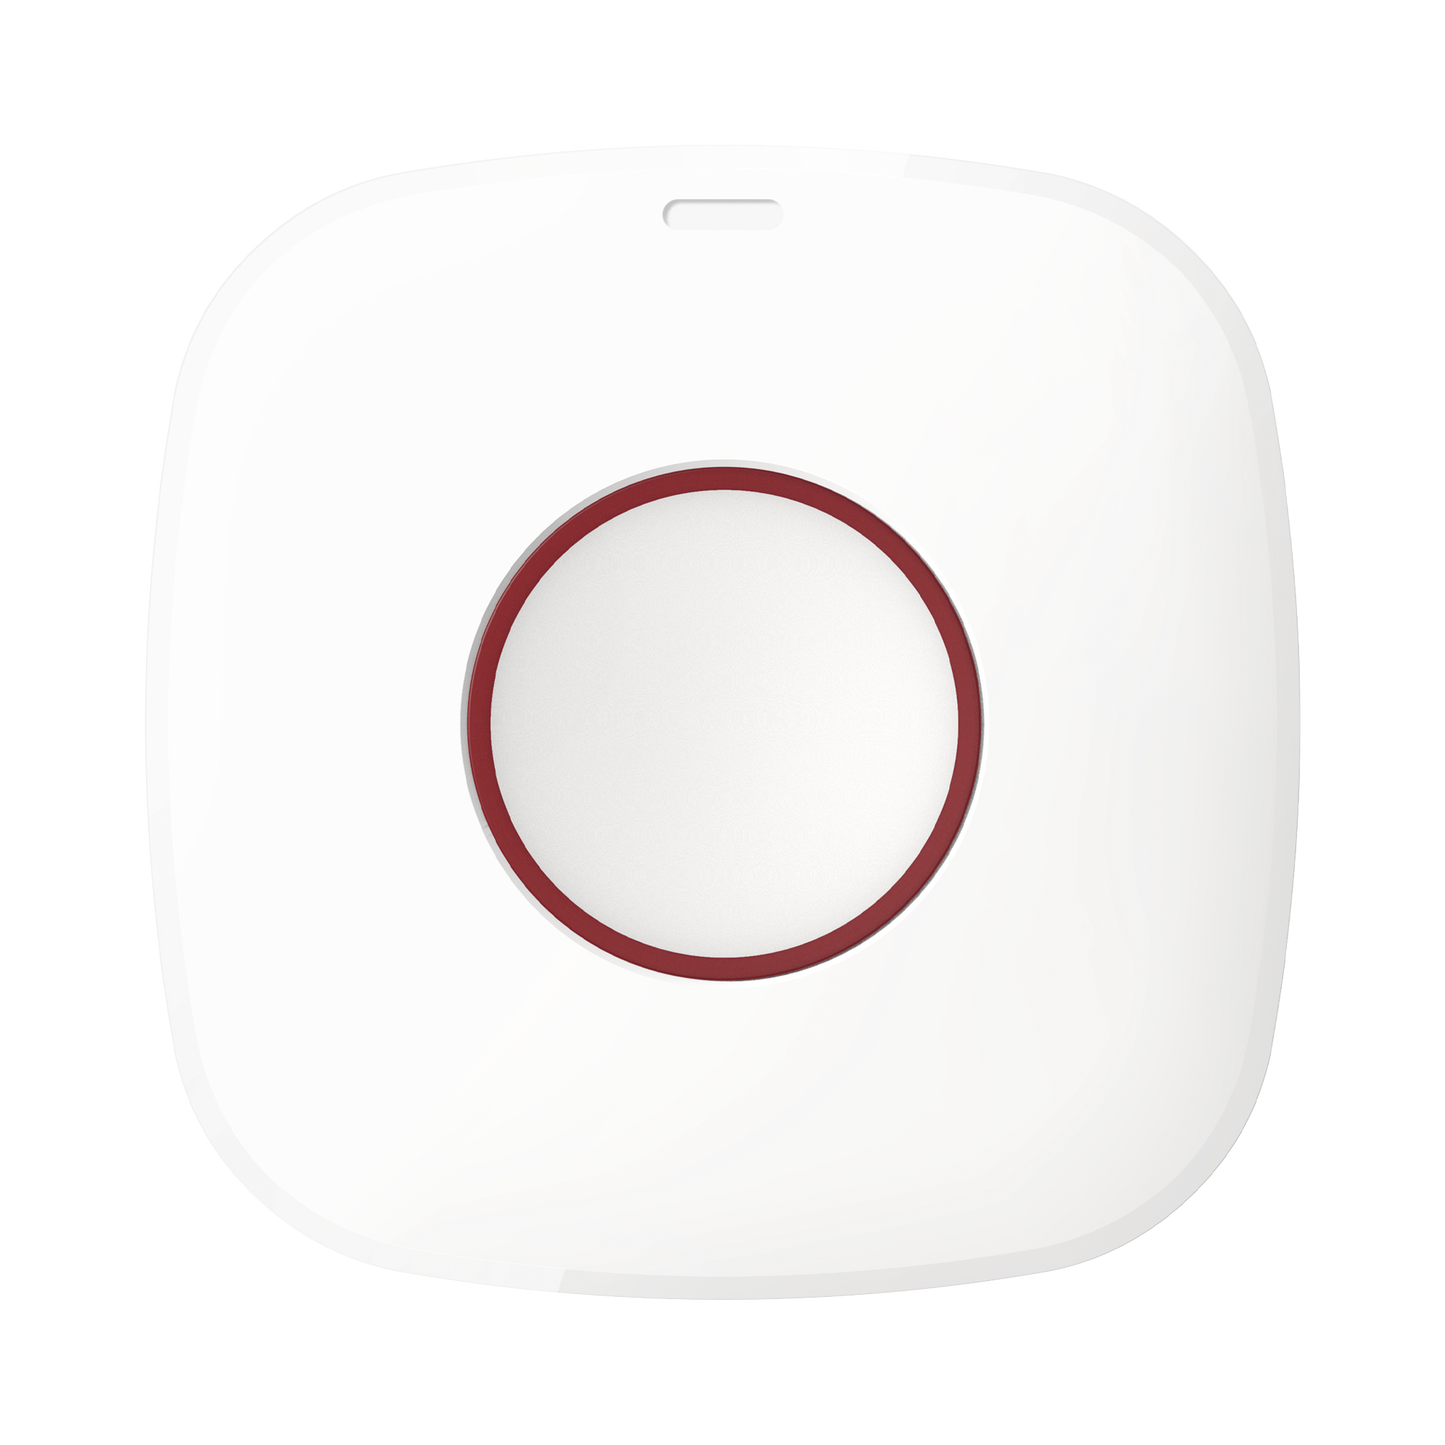 (AX HUB) Wireless panic button for HIKVISION alarm panel